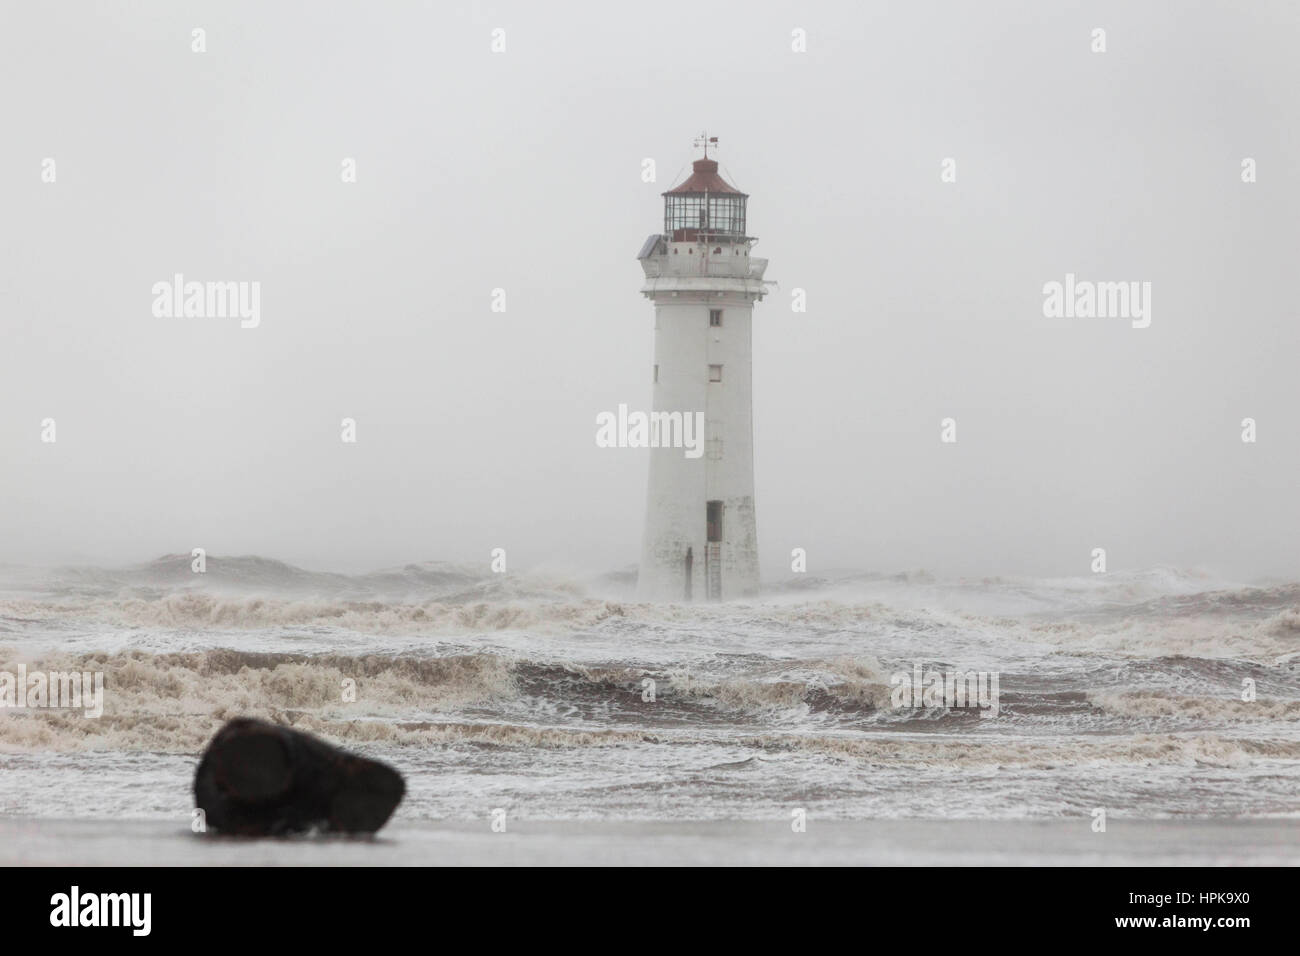 New Brighton, UK. 23rd Feb, 2017. High winds from Storm Doris batter the coastline at New Brighton on the Wirrall in the North West of England today (Thursday 23rd February) Waves hit Perch Rock Lighthouse. Picture by Credit: Chris Bull/Alamy Live News Stock Photo